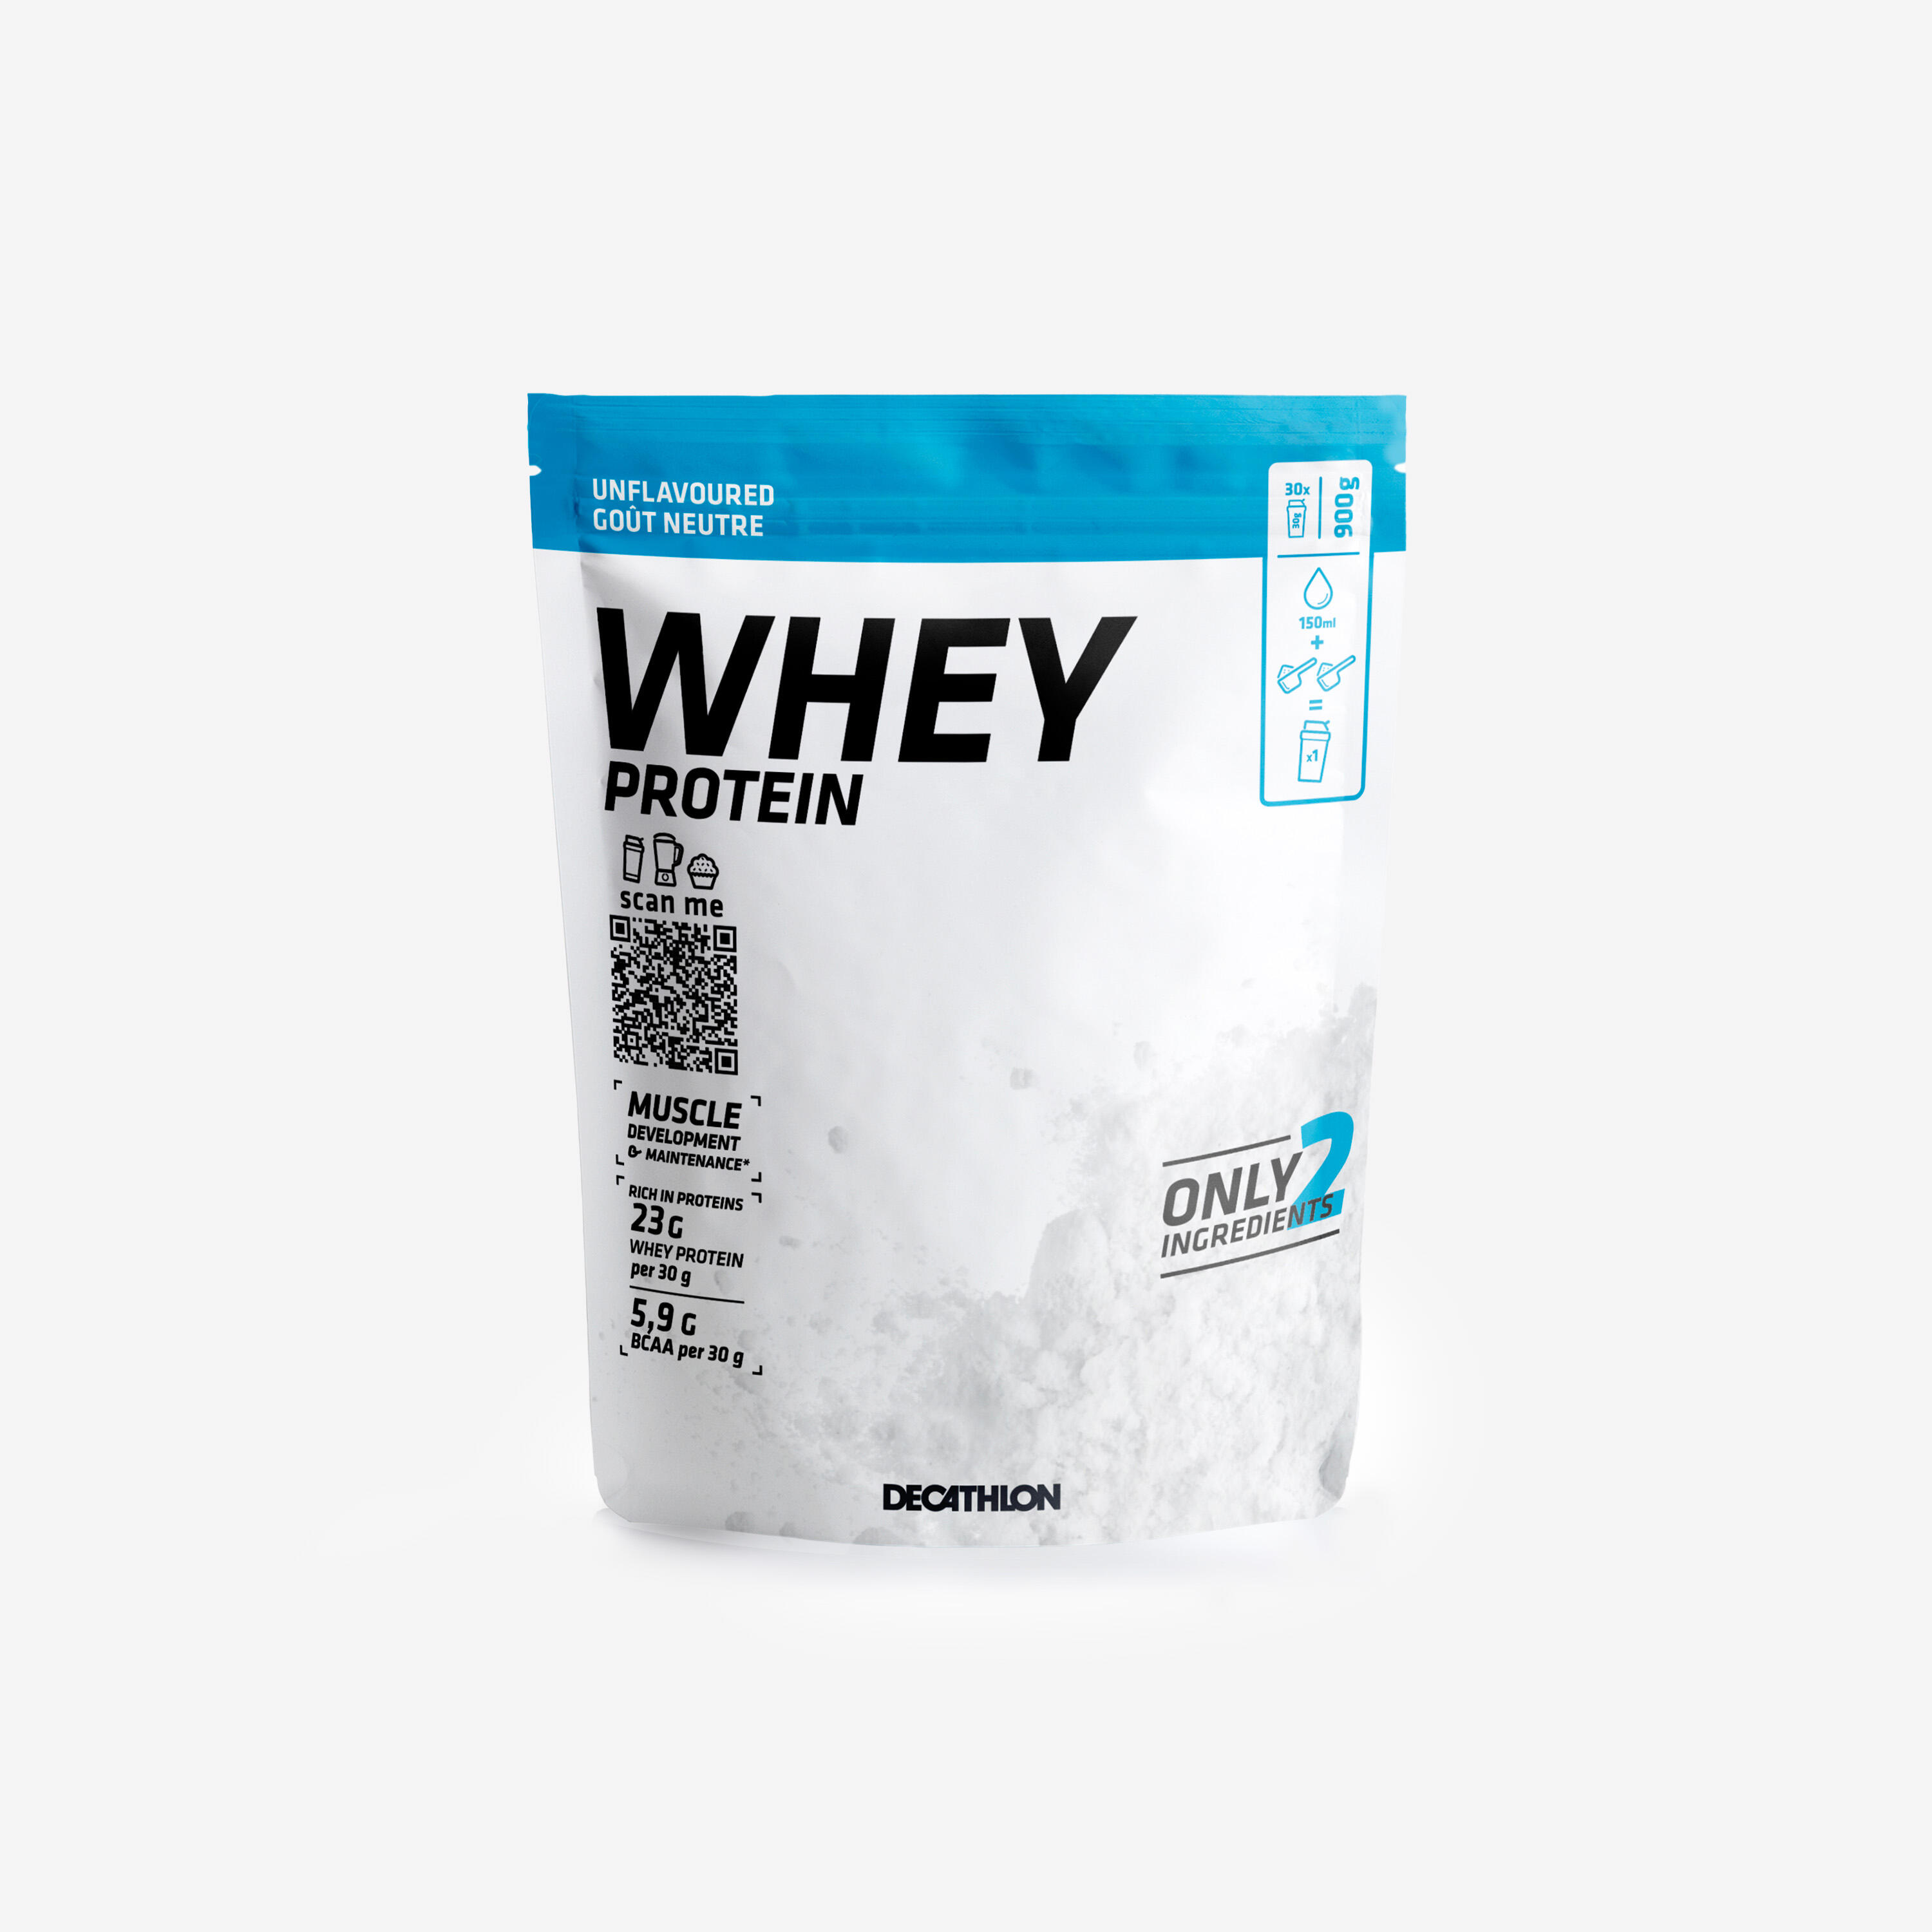 CORENGTH Whey Protein 900g - Unflavoured